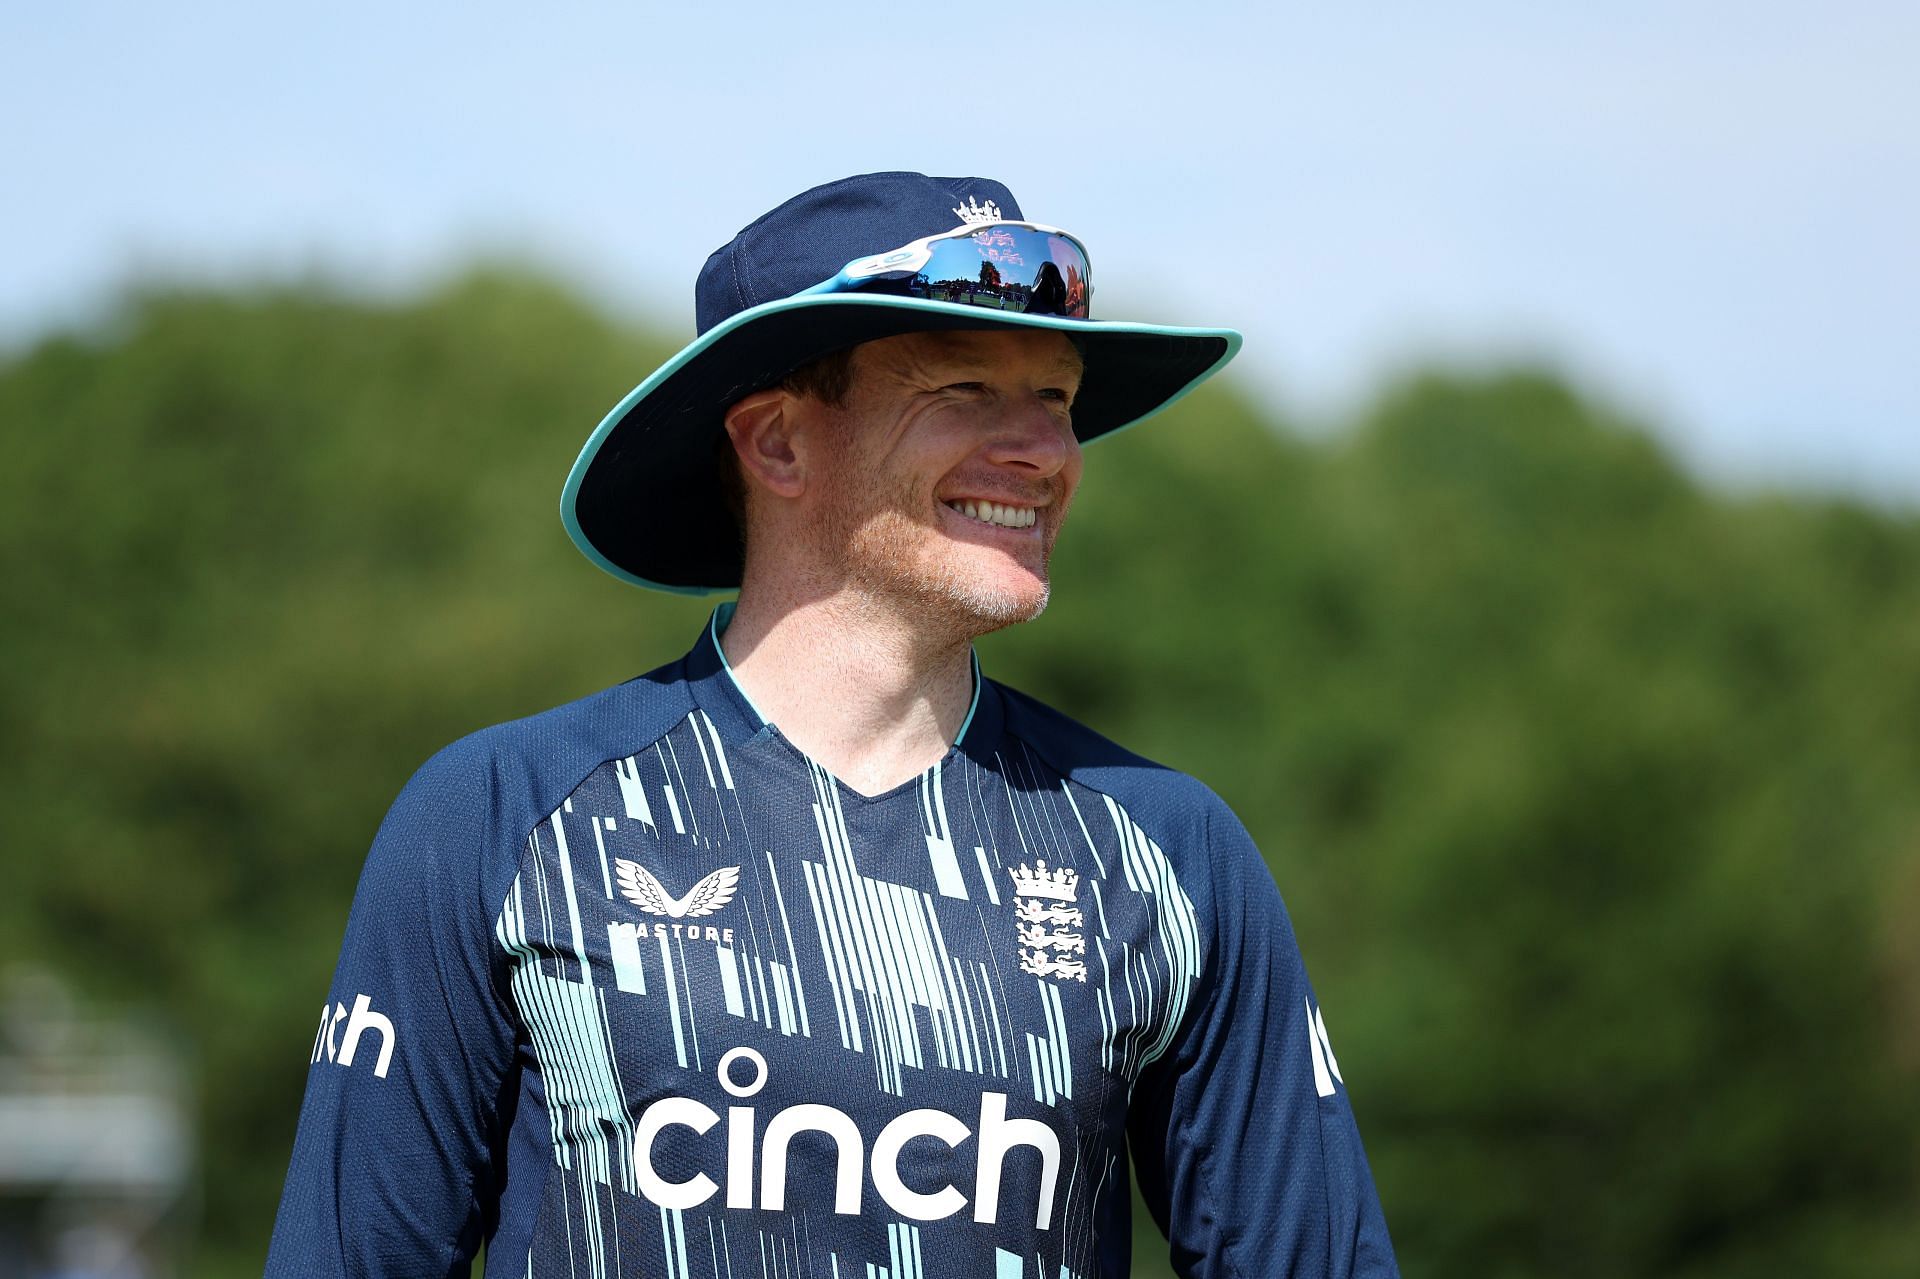 Eoin Morgan has been struggling for runs. (Image Credits: Getty)